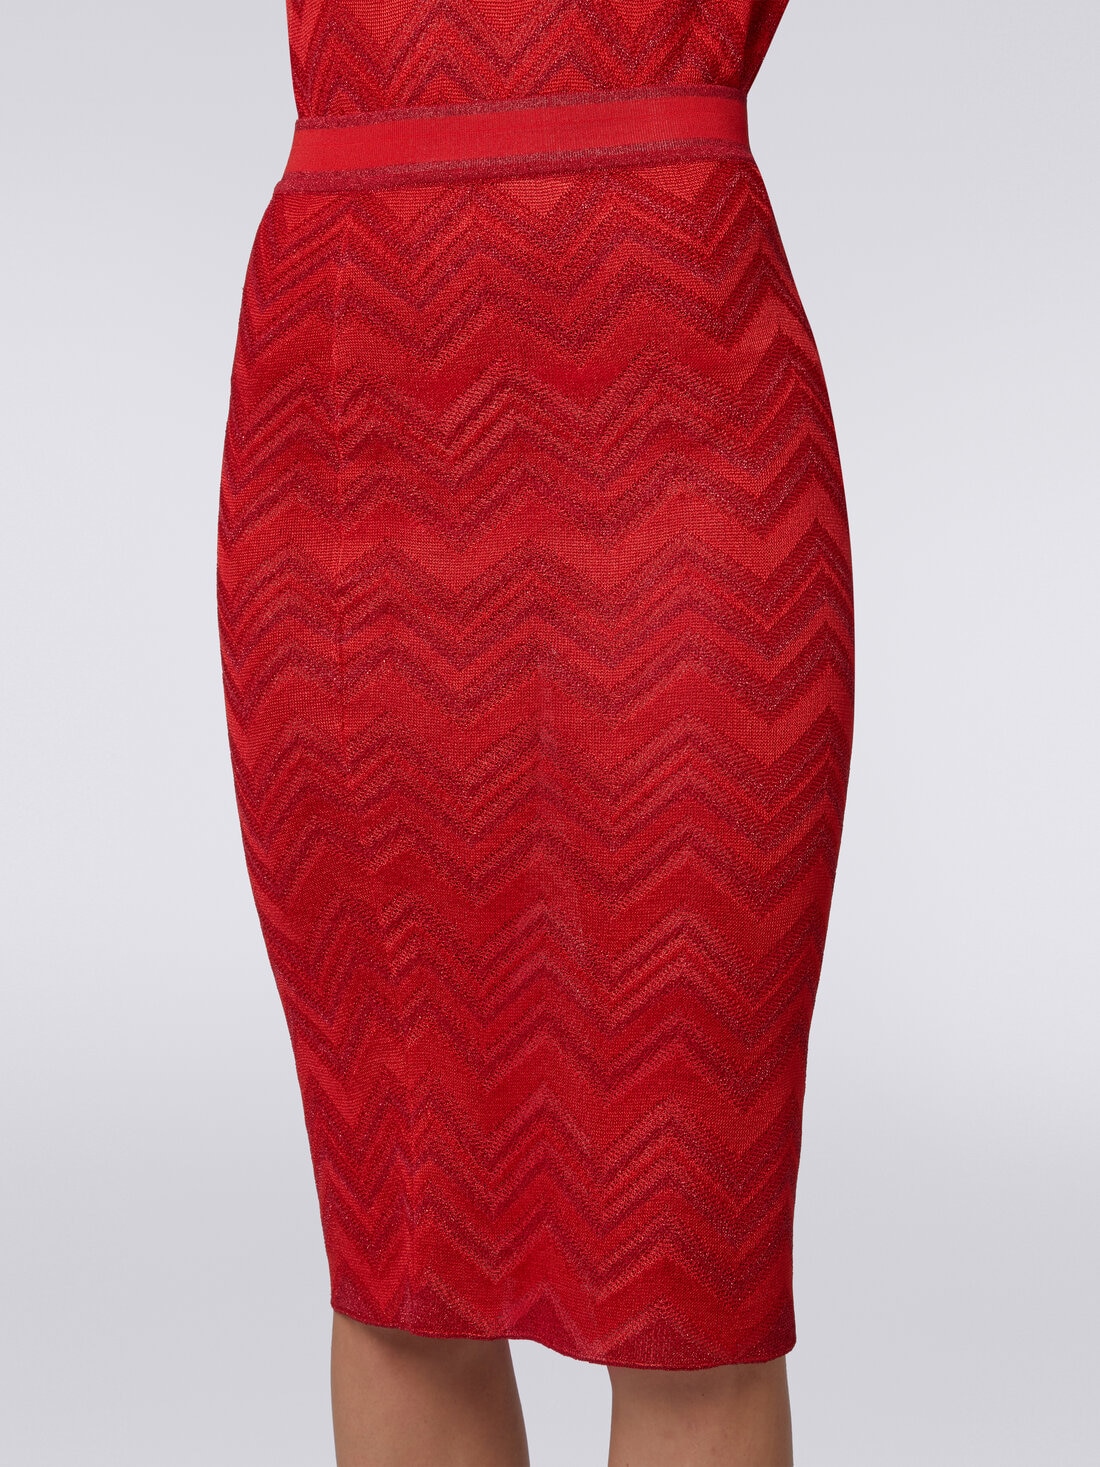 Longuette skirt in zigzag knit with lurex, Red  - DS24SH0TBK034J81756 - 4